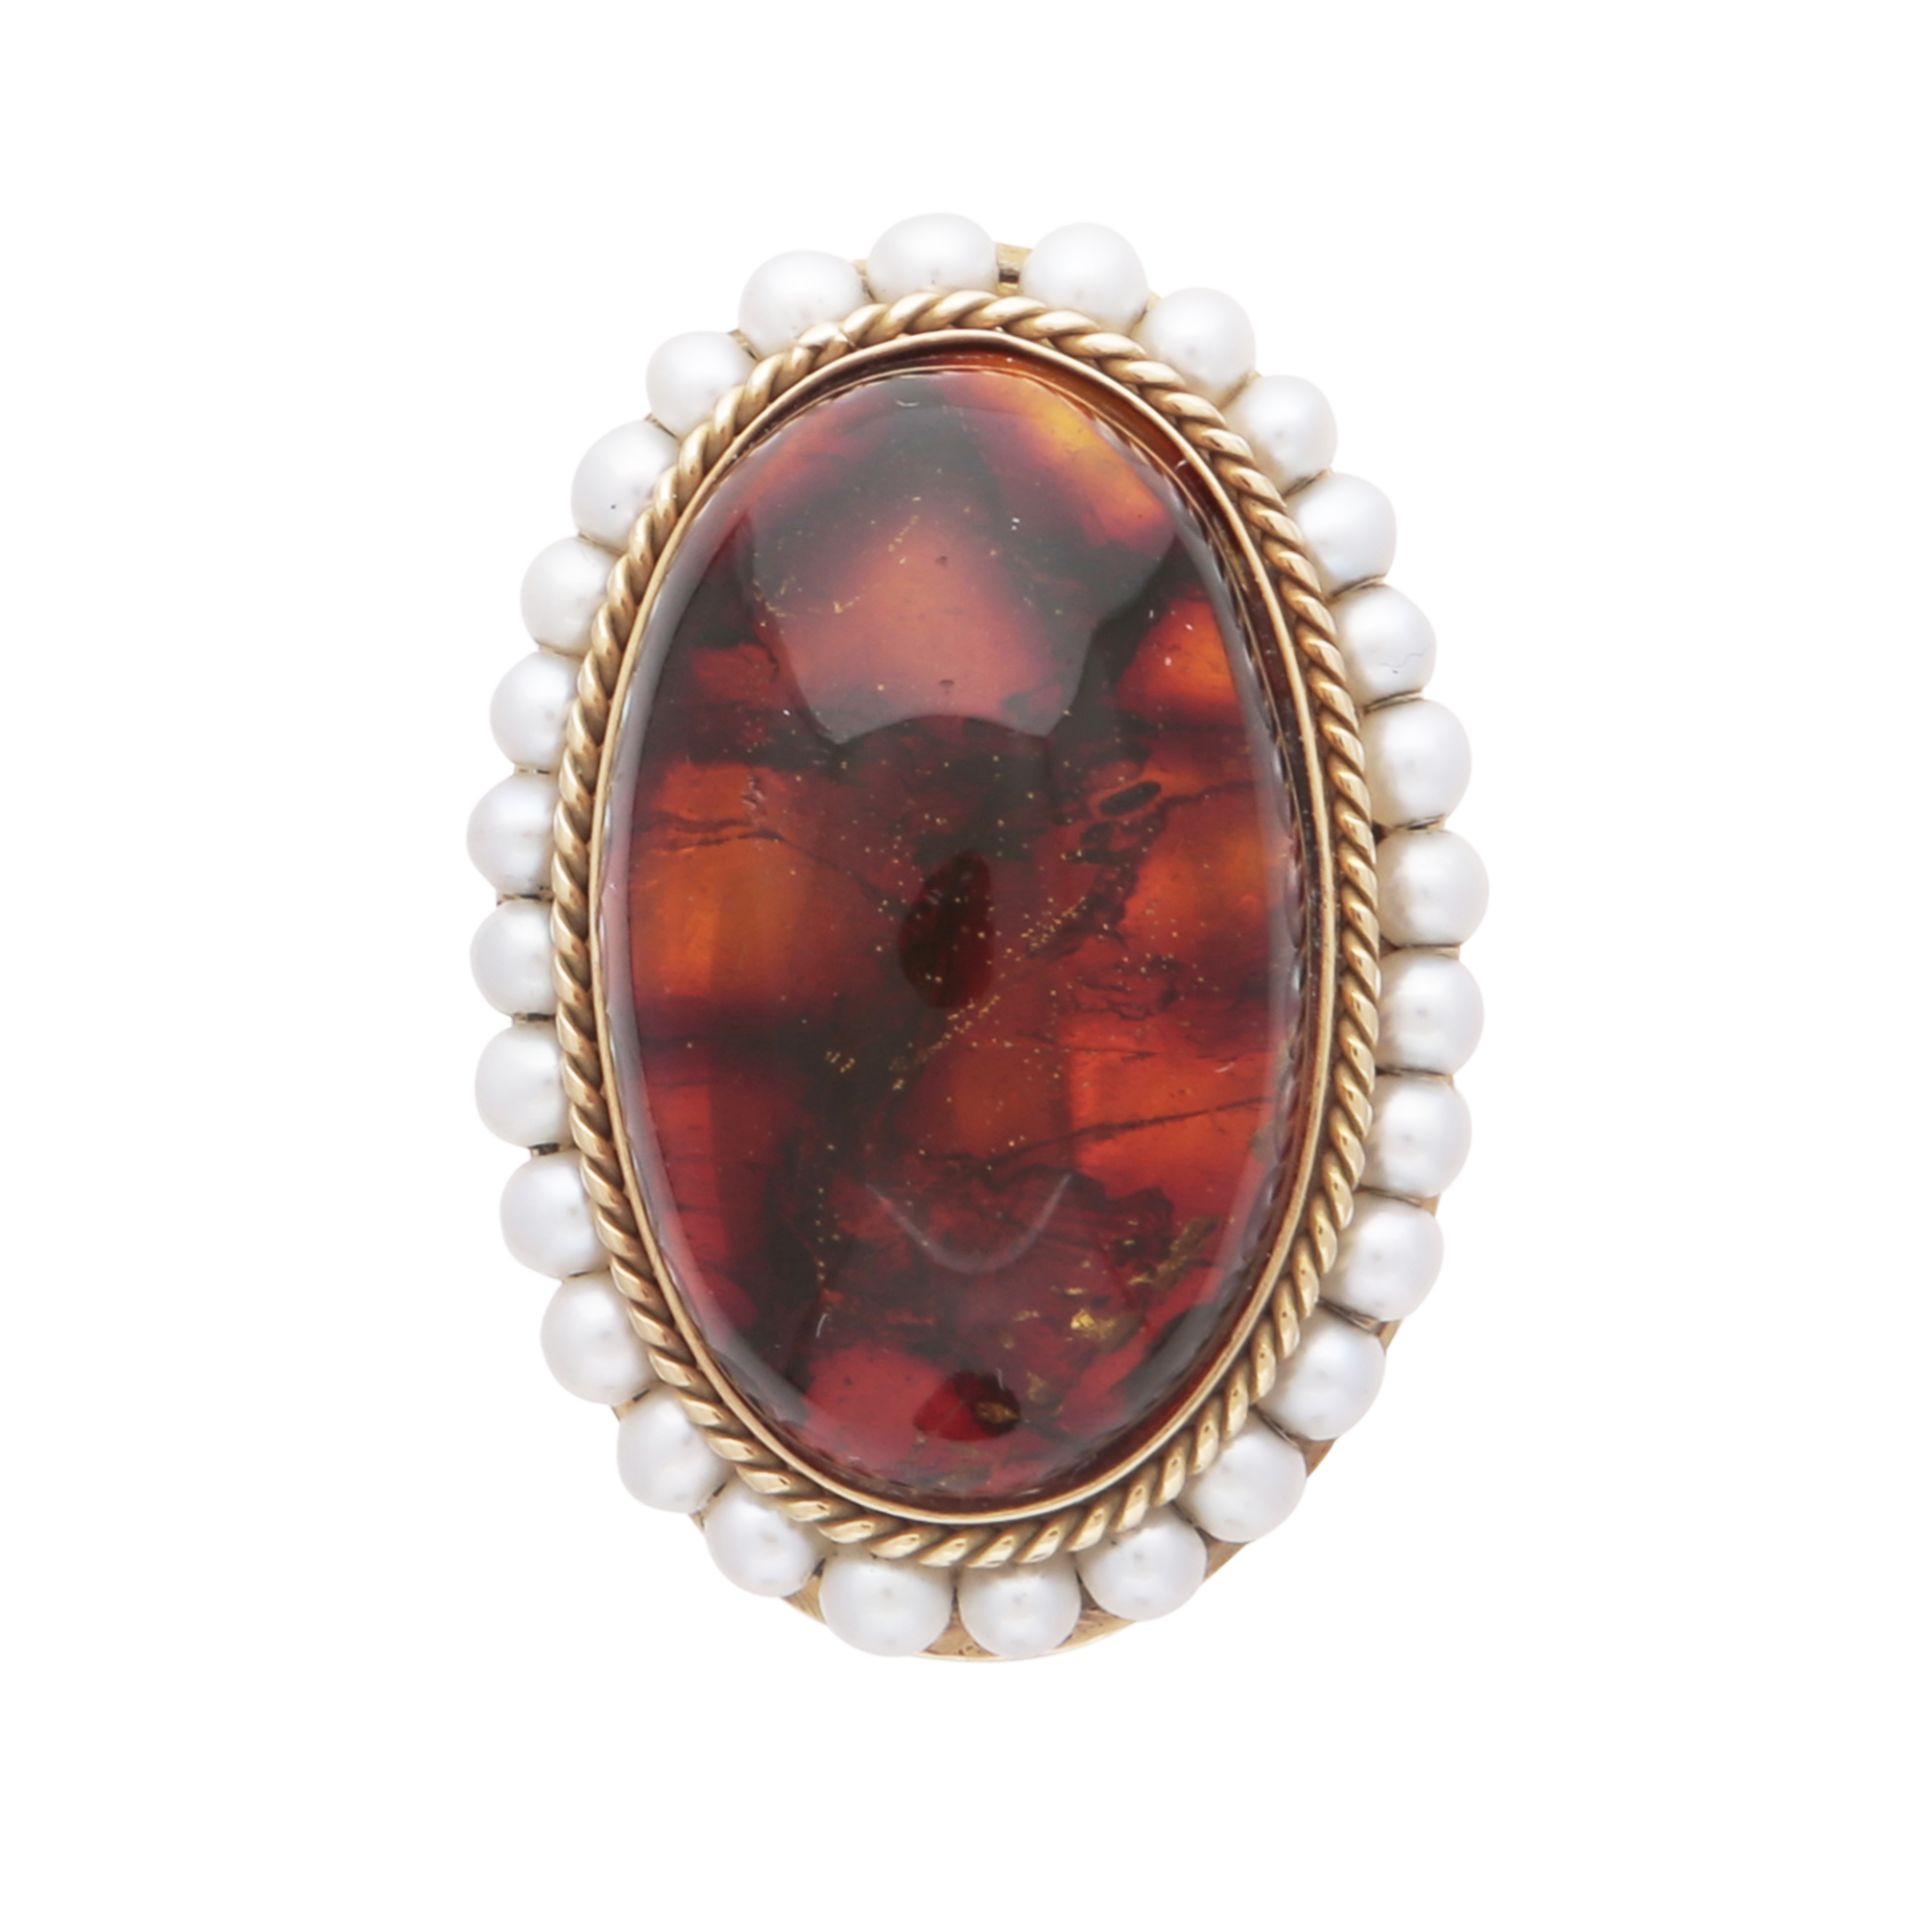 An antique Italian amber and pearl dress ring in 18ct yellow gold, the large amber cabochon